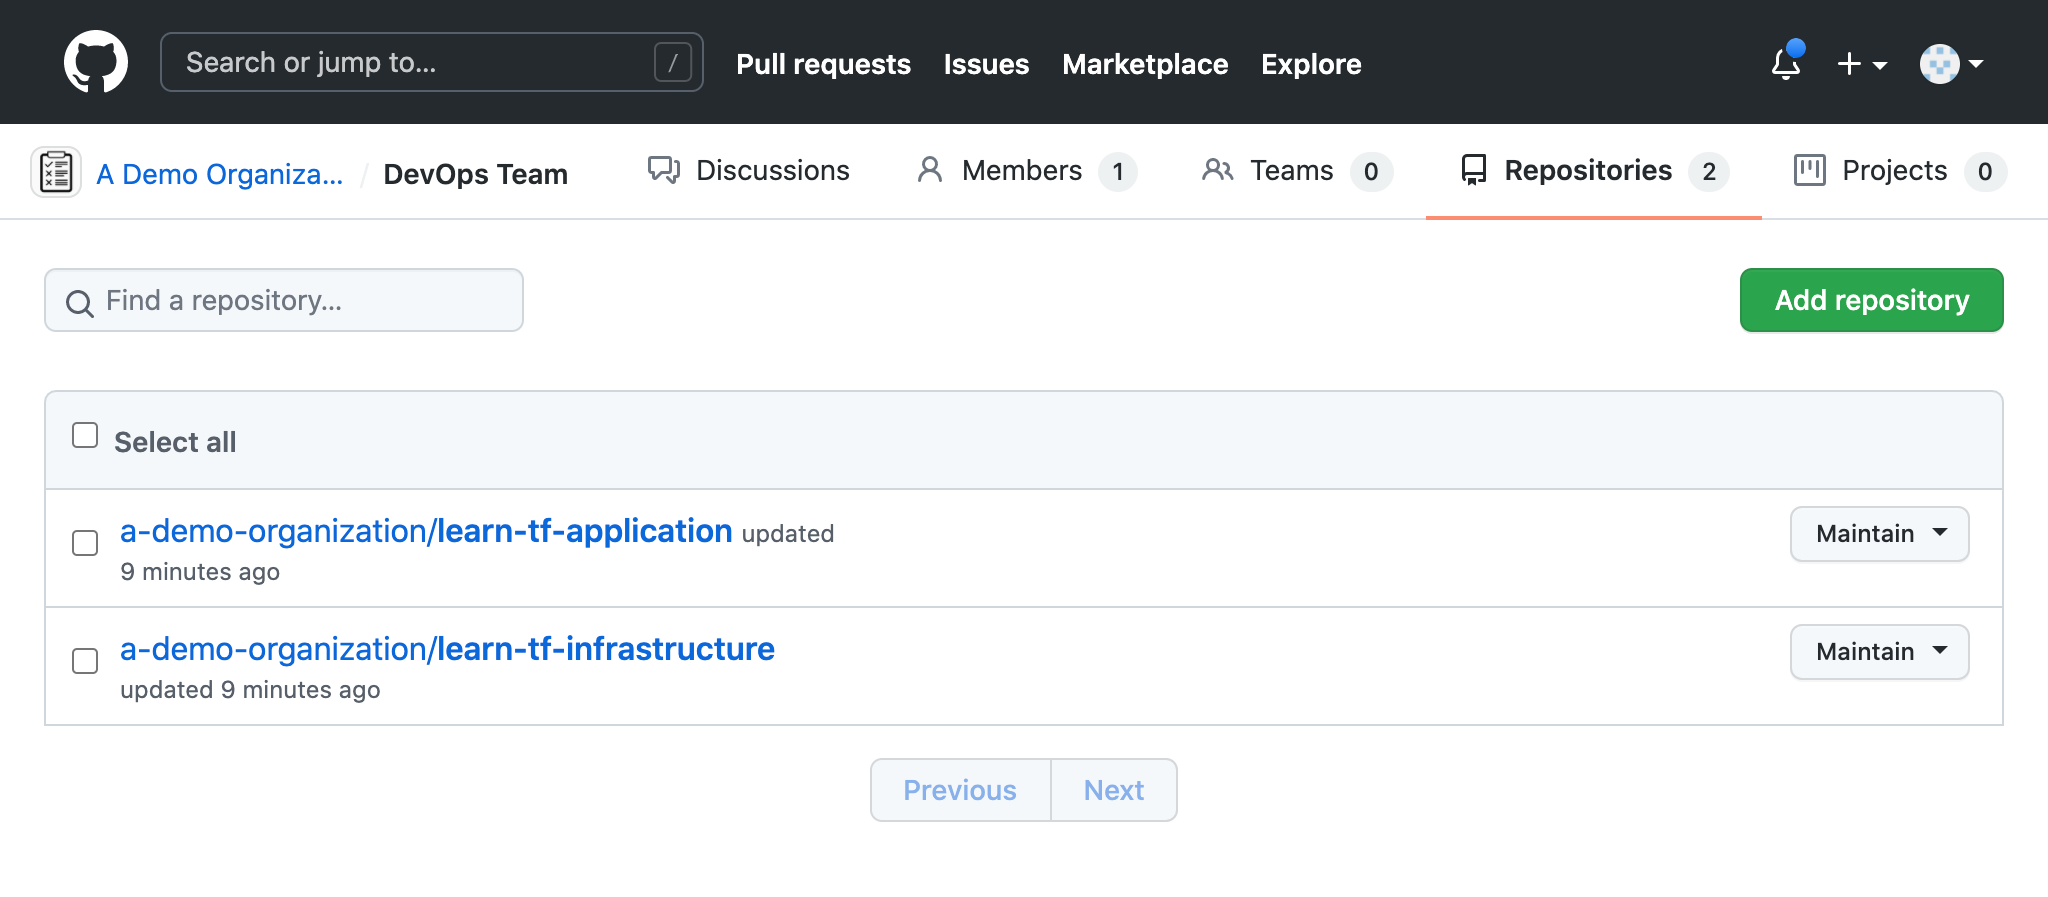 Dashboard showing that the DevOps team has maintain permissions to repositories.